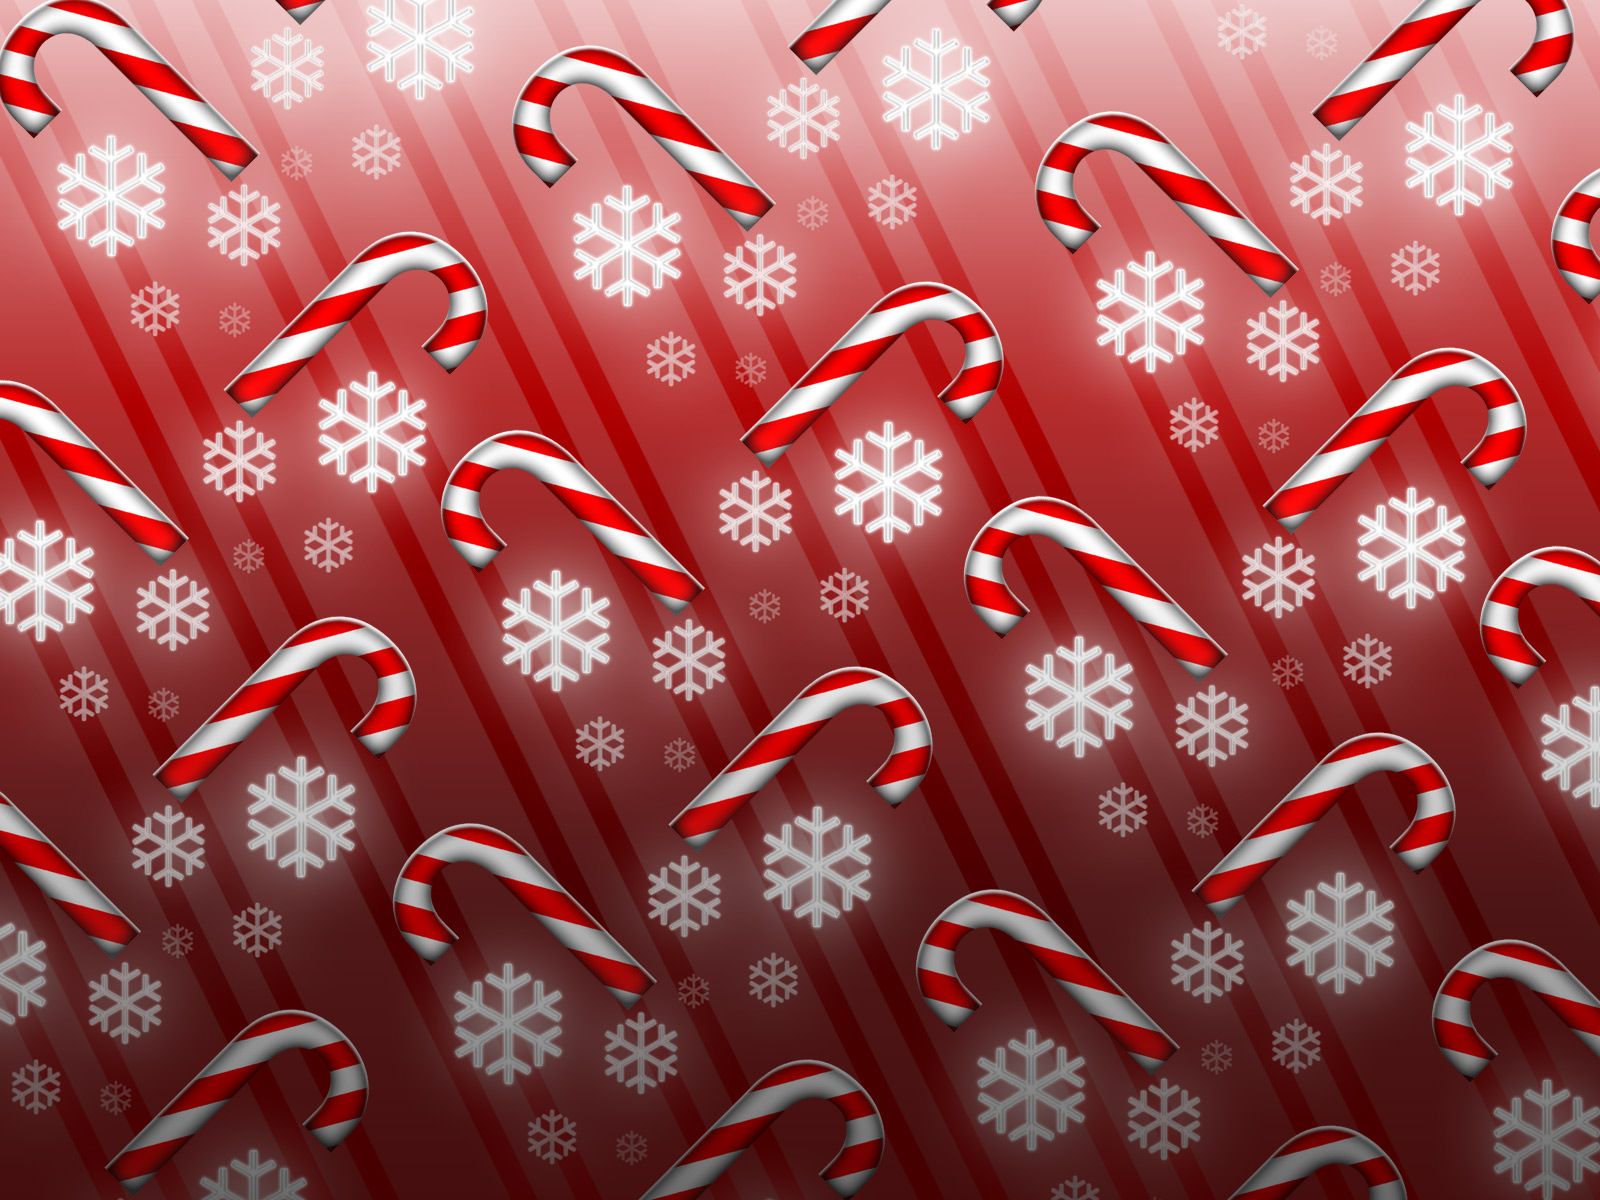 Candy Cane Wallpaper Free Candy Cane Background